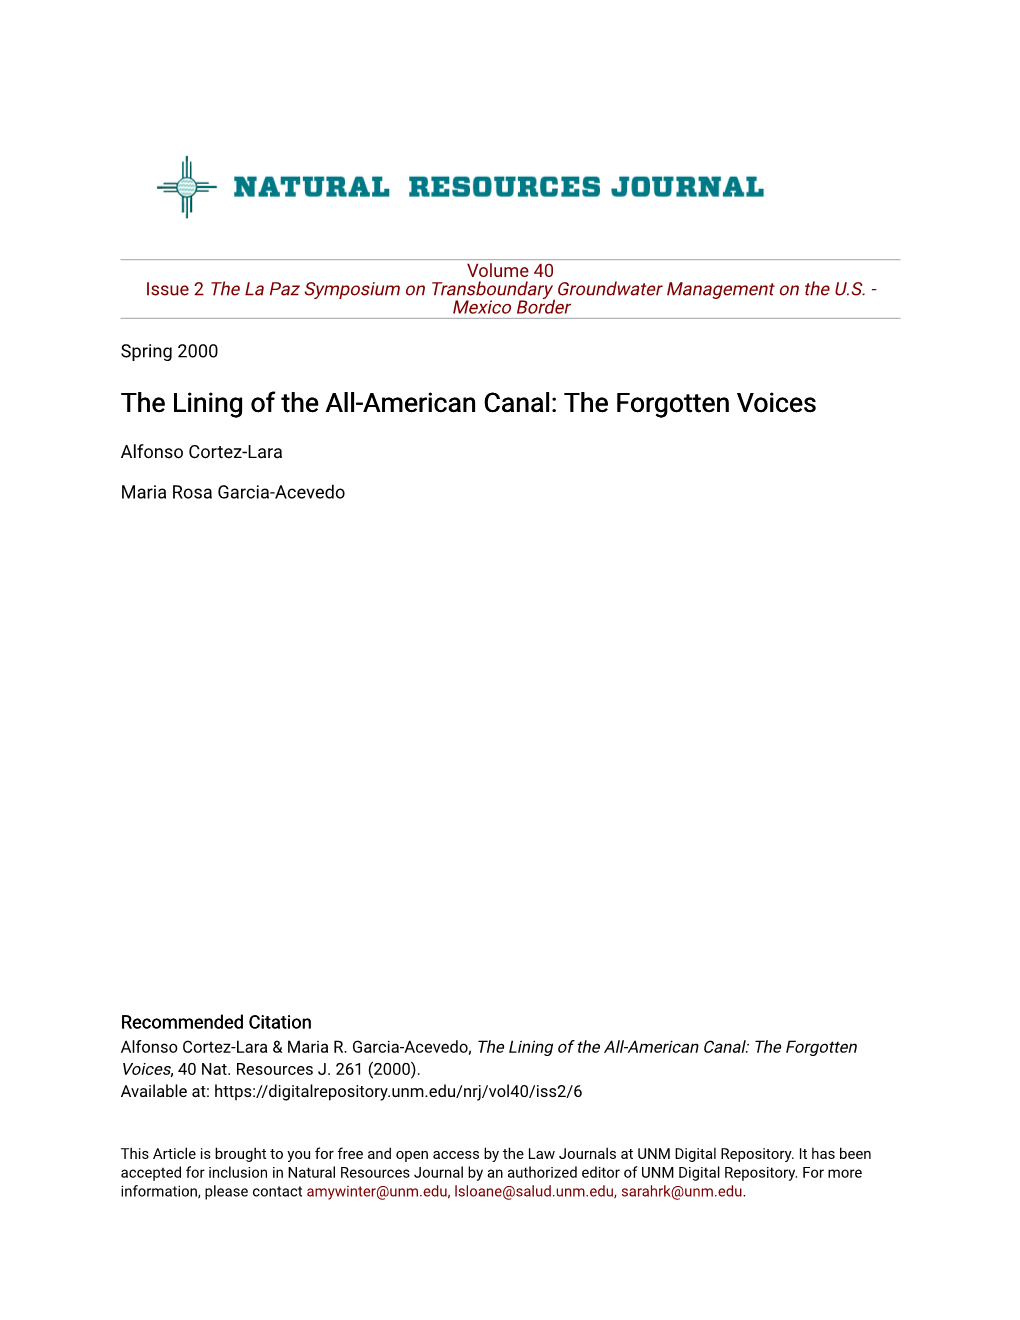 The Lining of the All-American Canal: the Forgotten Voices